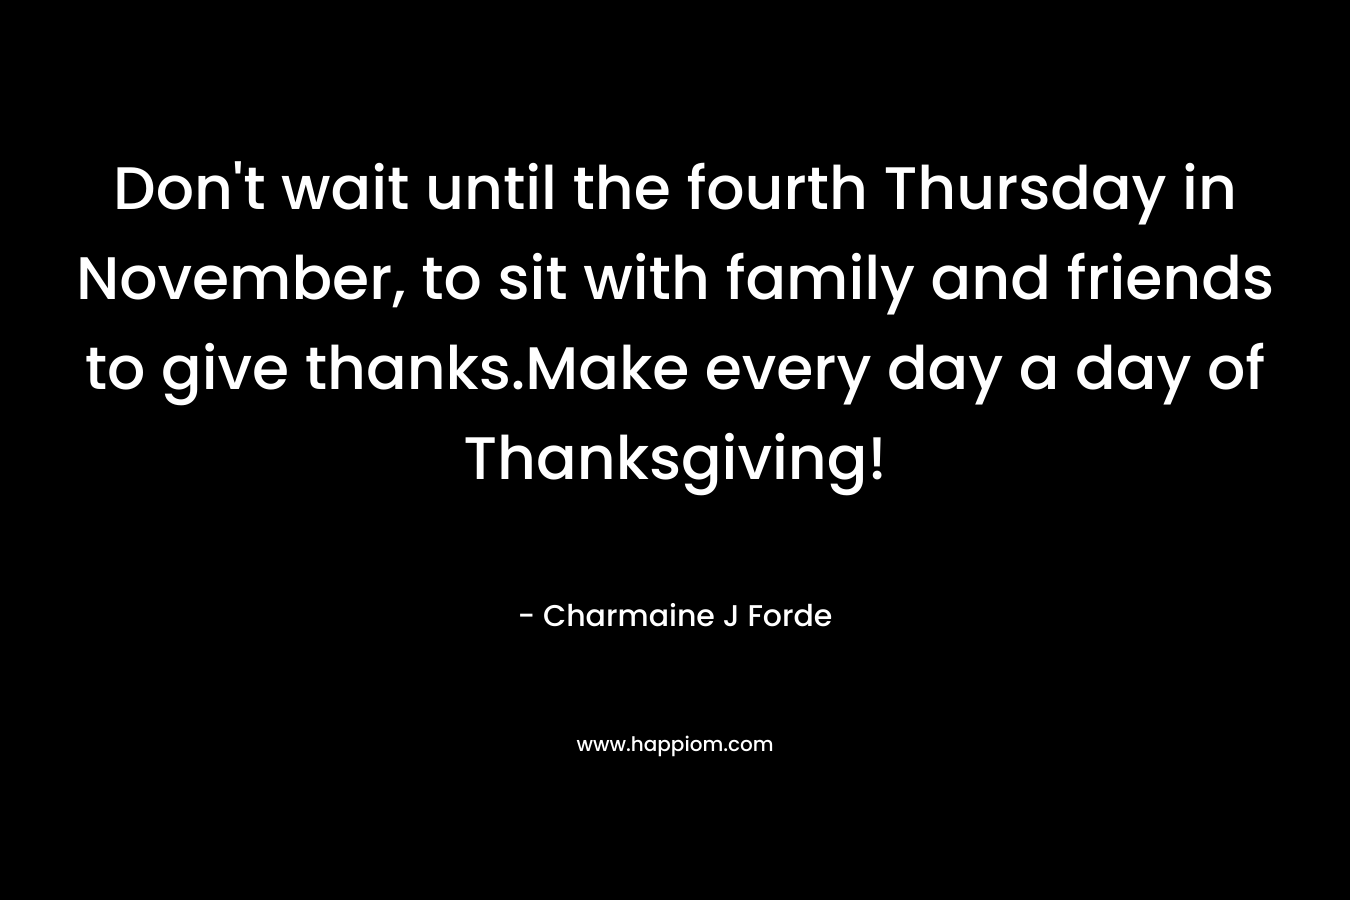 Don’t wait until the fourth Thursday in November, to sit with family and friends to give thanks.Make every day a day of Thanksgiving! – Charmaine J Forde